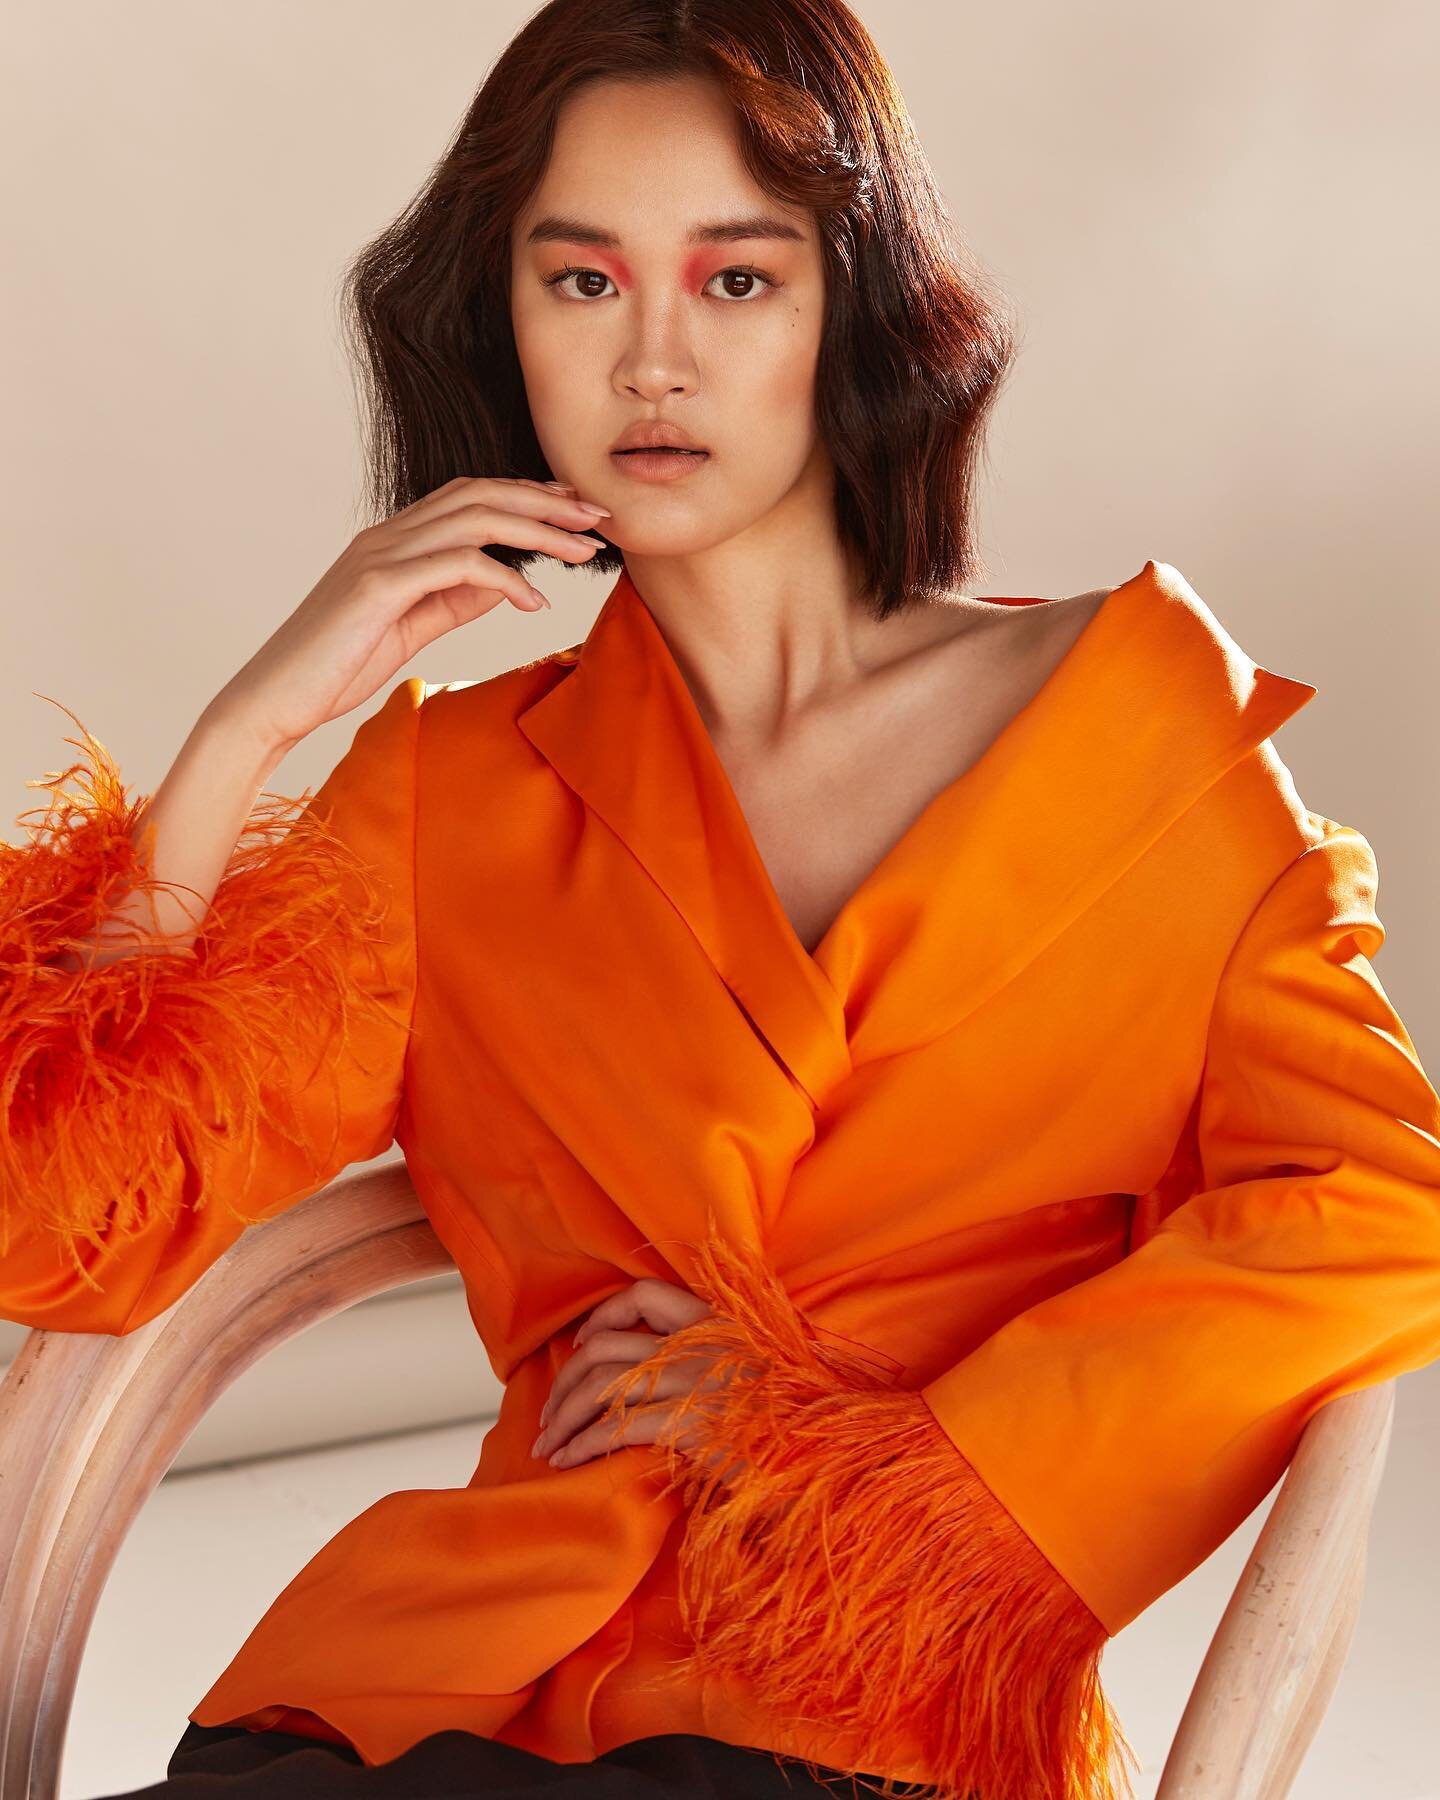 Jiayi @anm_mgmt 🧡

Photography and styling by me 
Hair and make up by @esbridal
Retouching by @joannawojewoda